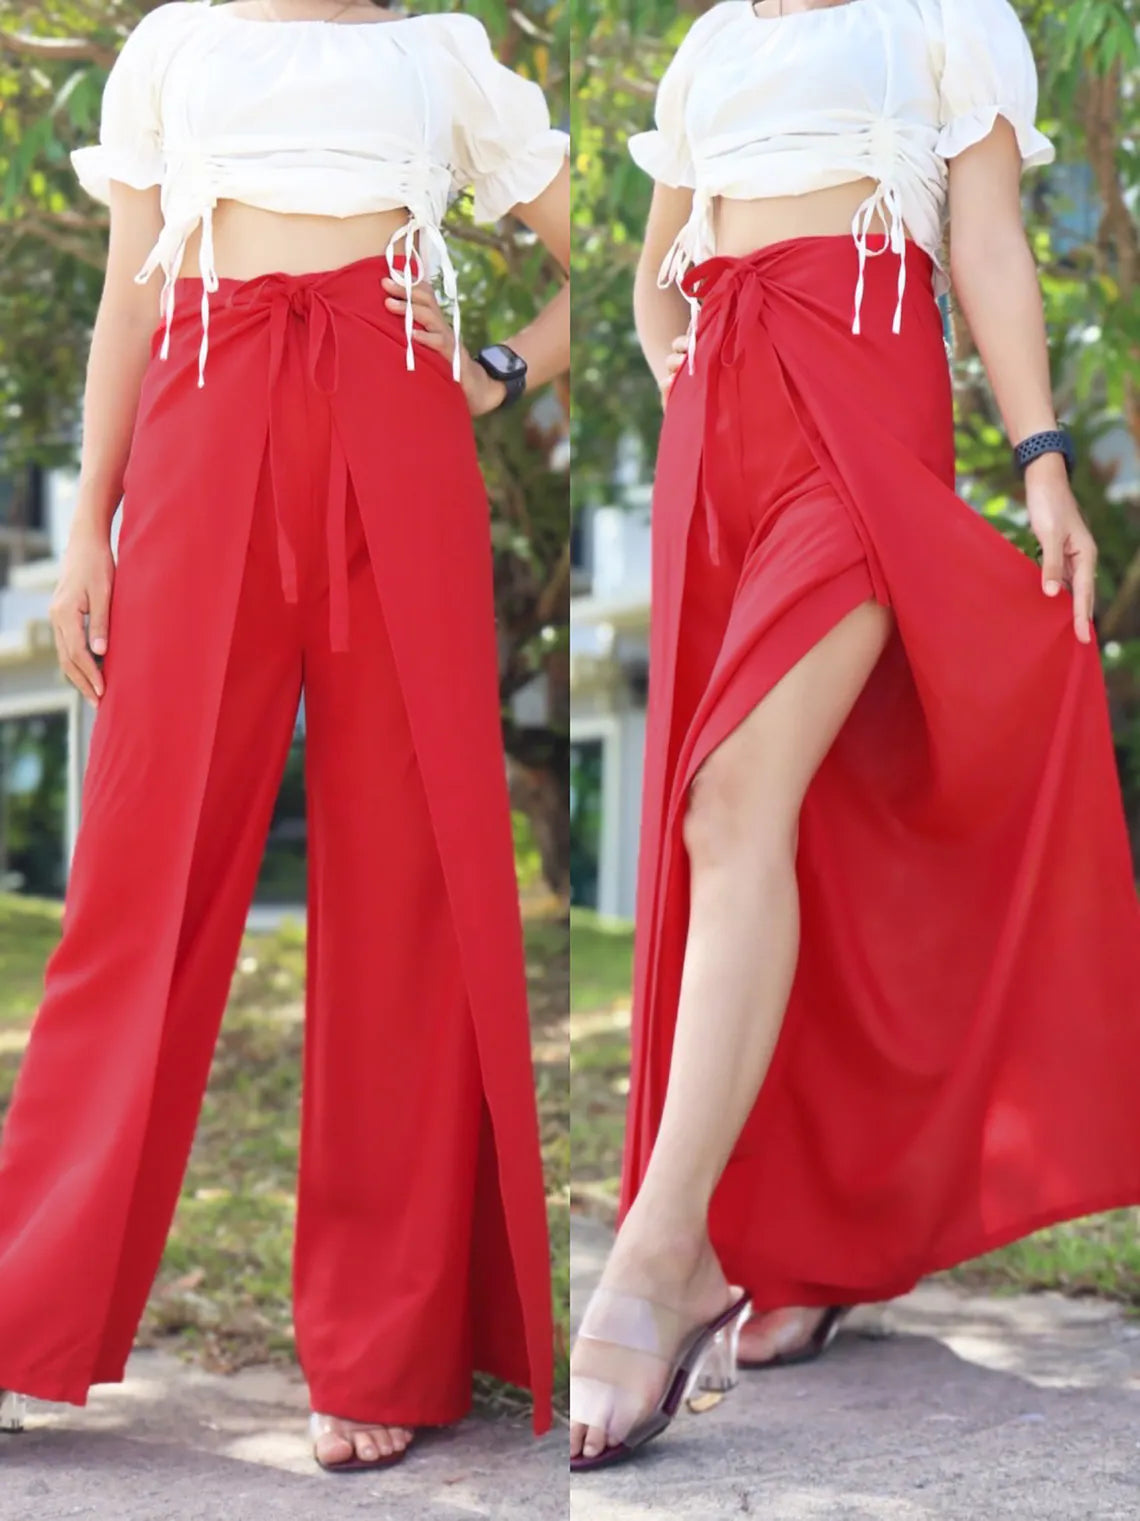 Boho-style red wrap pants with a white cropped top, displayed from various angles to showcase the vibrant design and versatility.